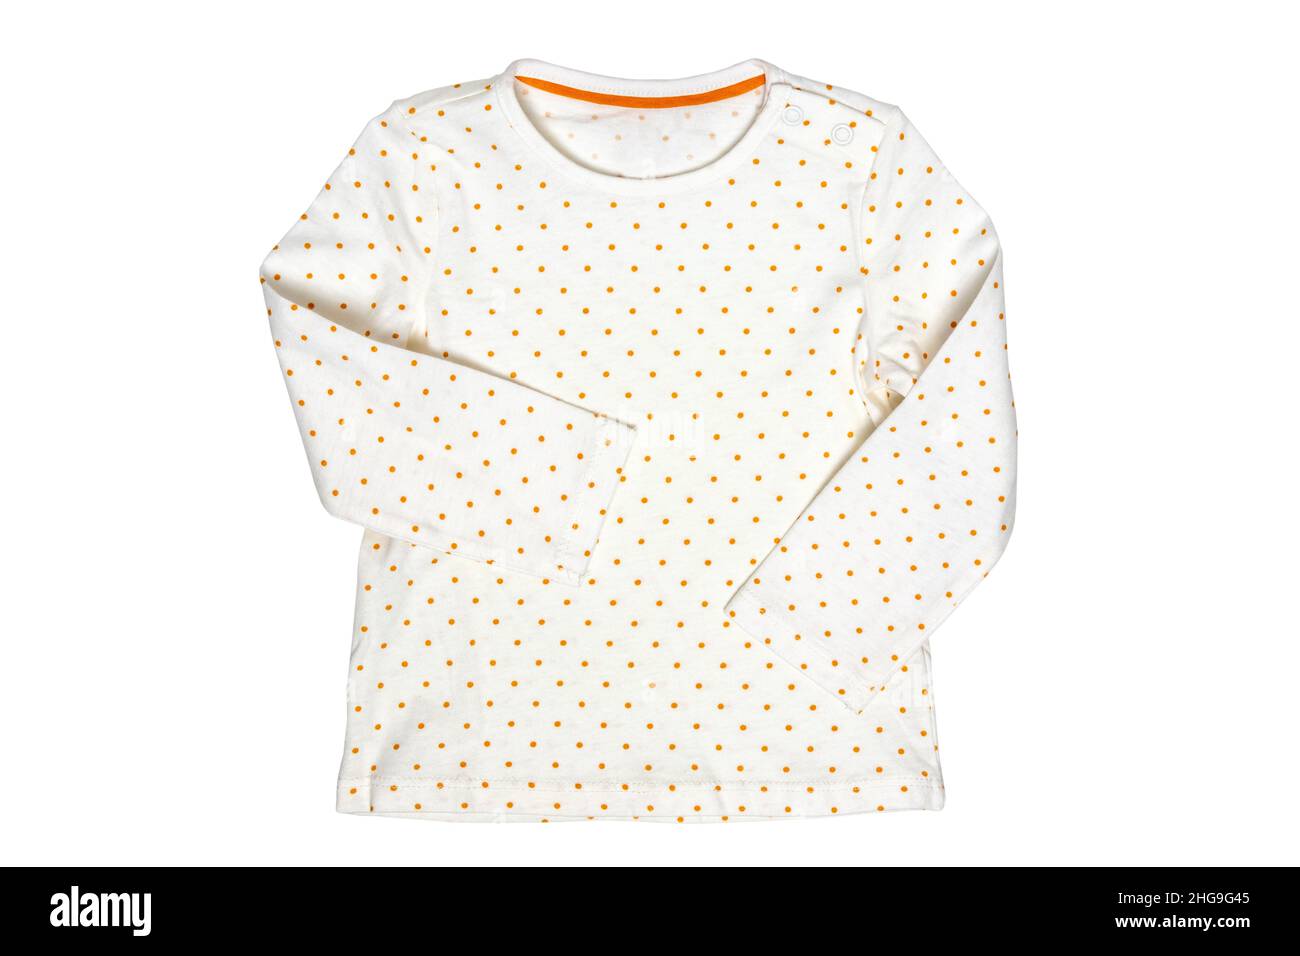 Summer shirt isolated. Closeup of a white baby girl shirt or t-shirt with yellow polka dots isolated on a white background. Clipping path. Children sp Stock Photo